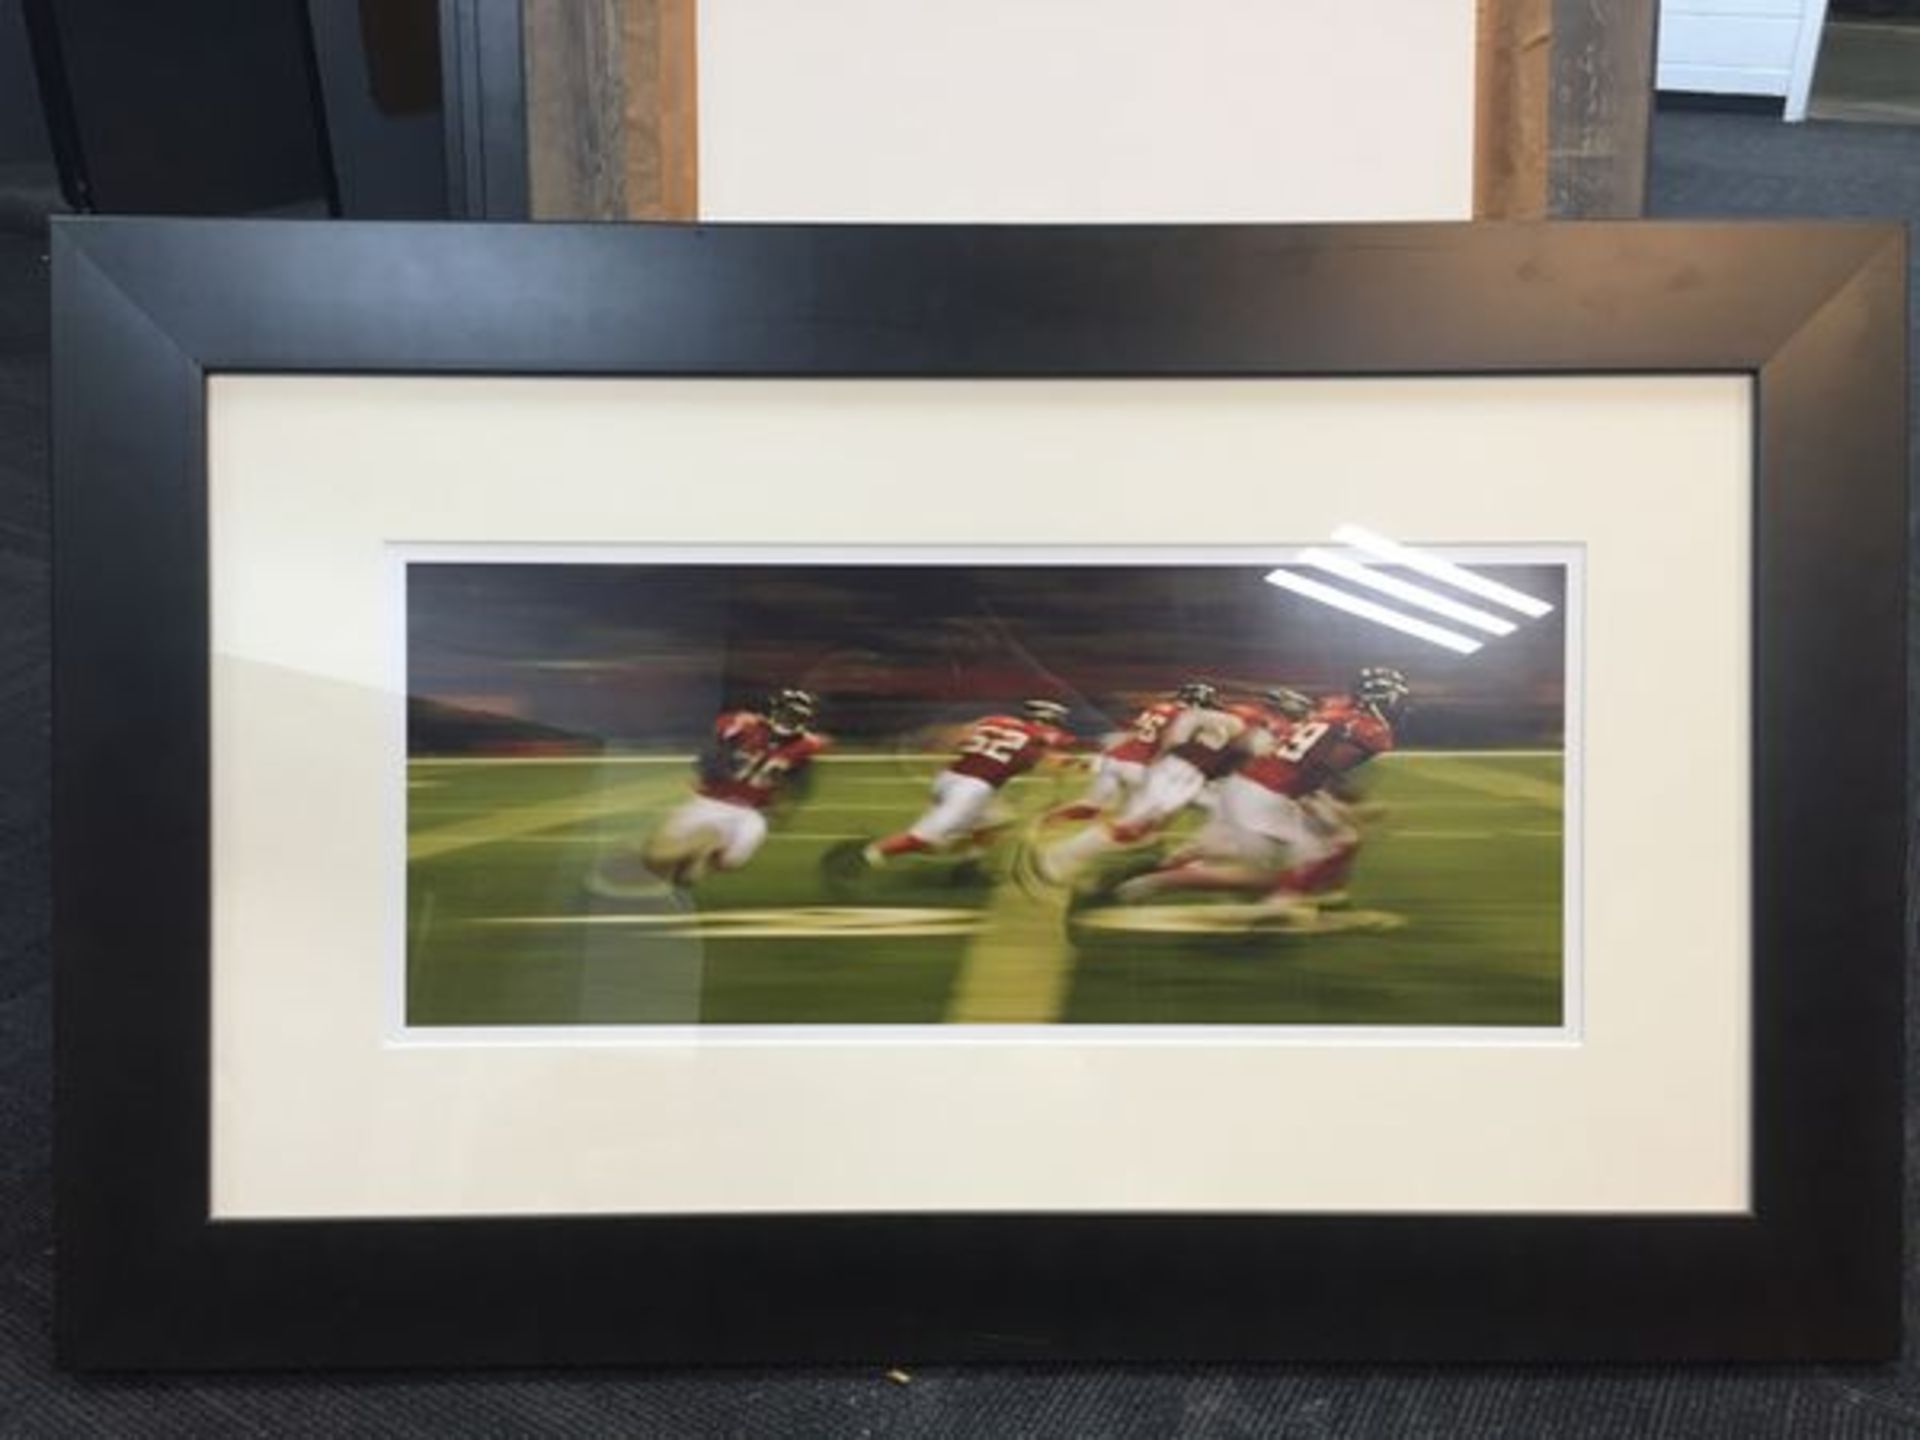 Slow Motion Sweep Picture 4 ft. x 29 inch. / GA DOME ITEM / This item includes Georgia Dome